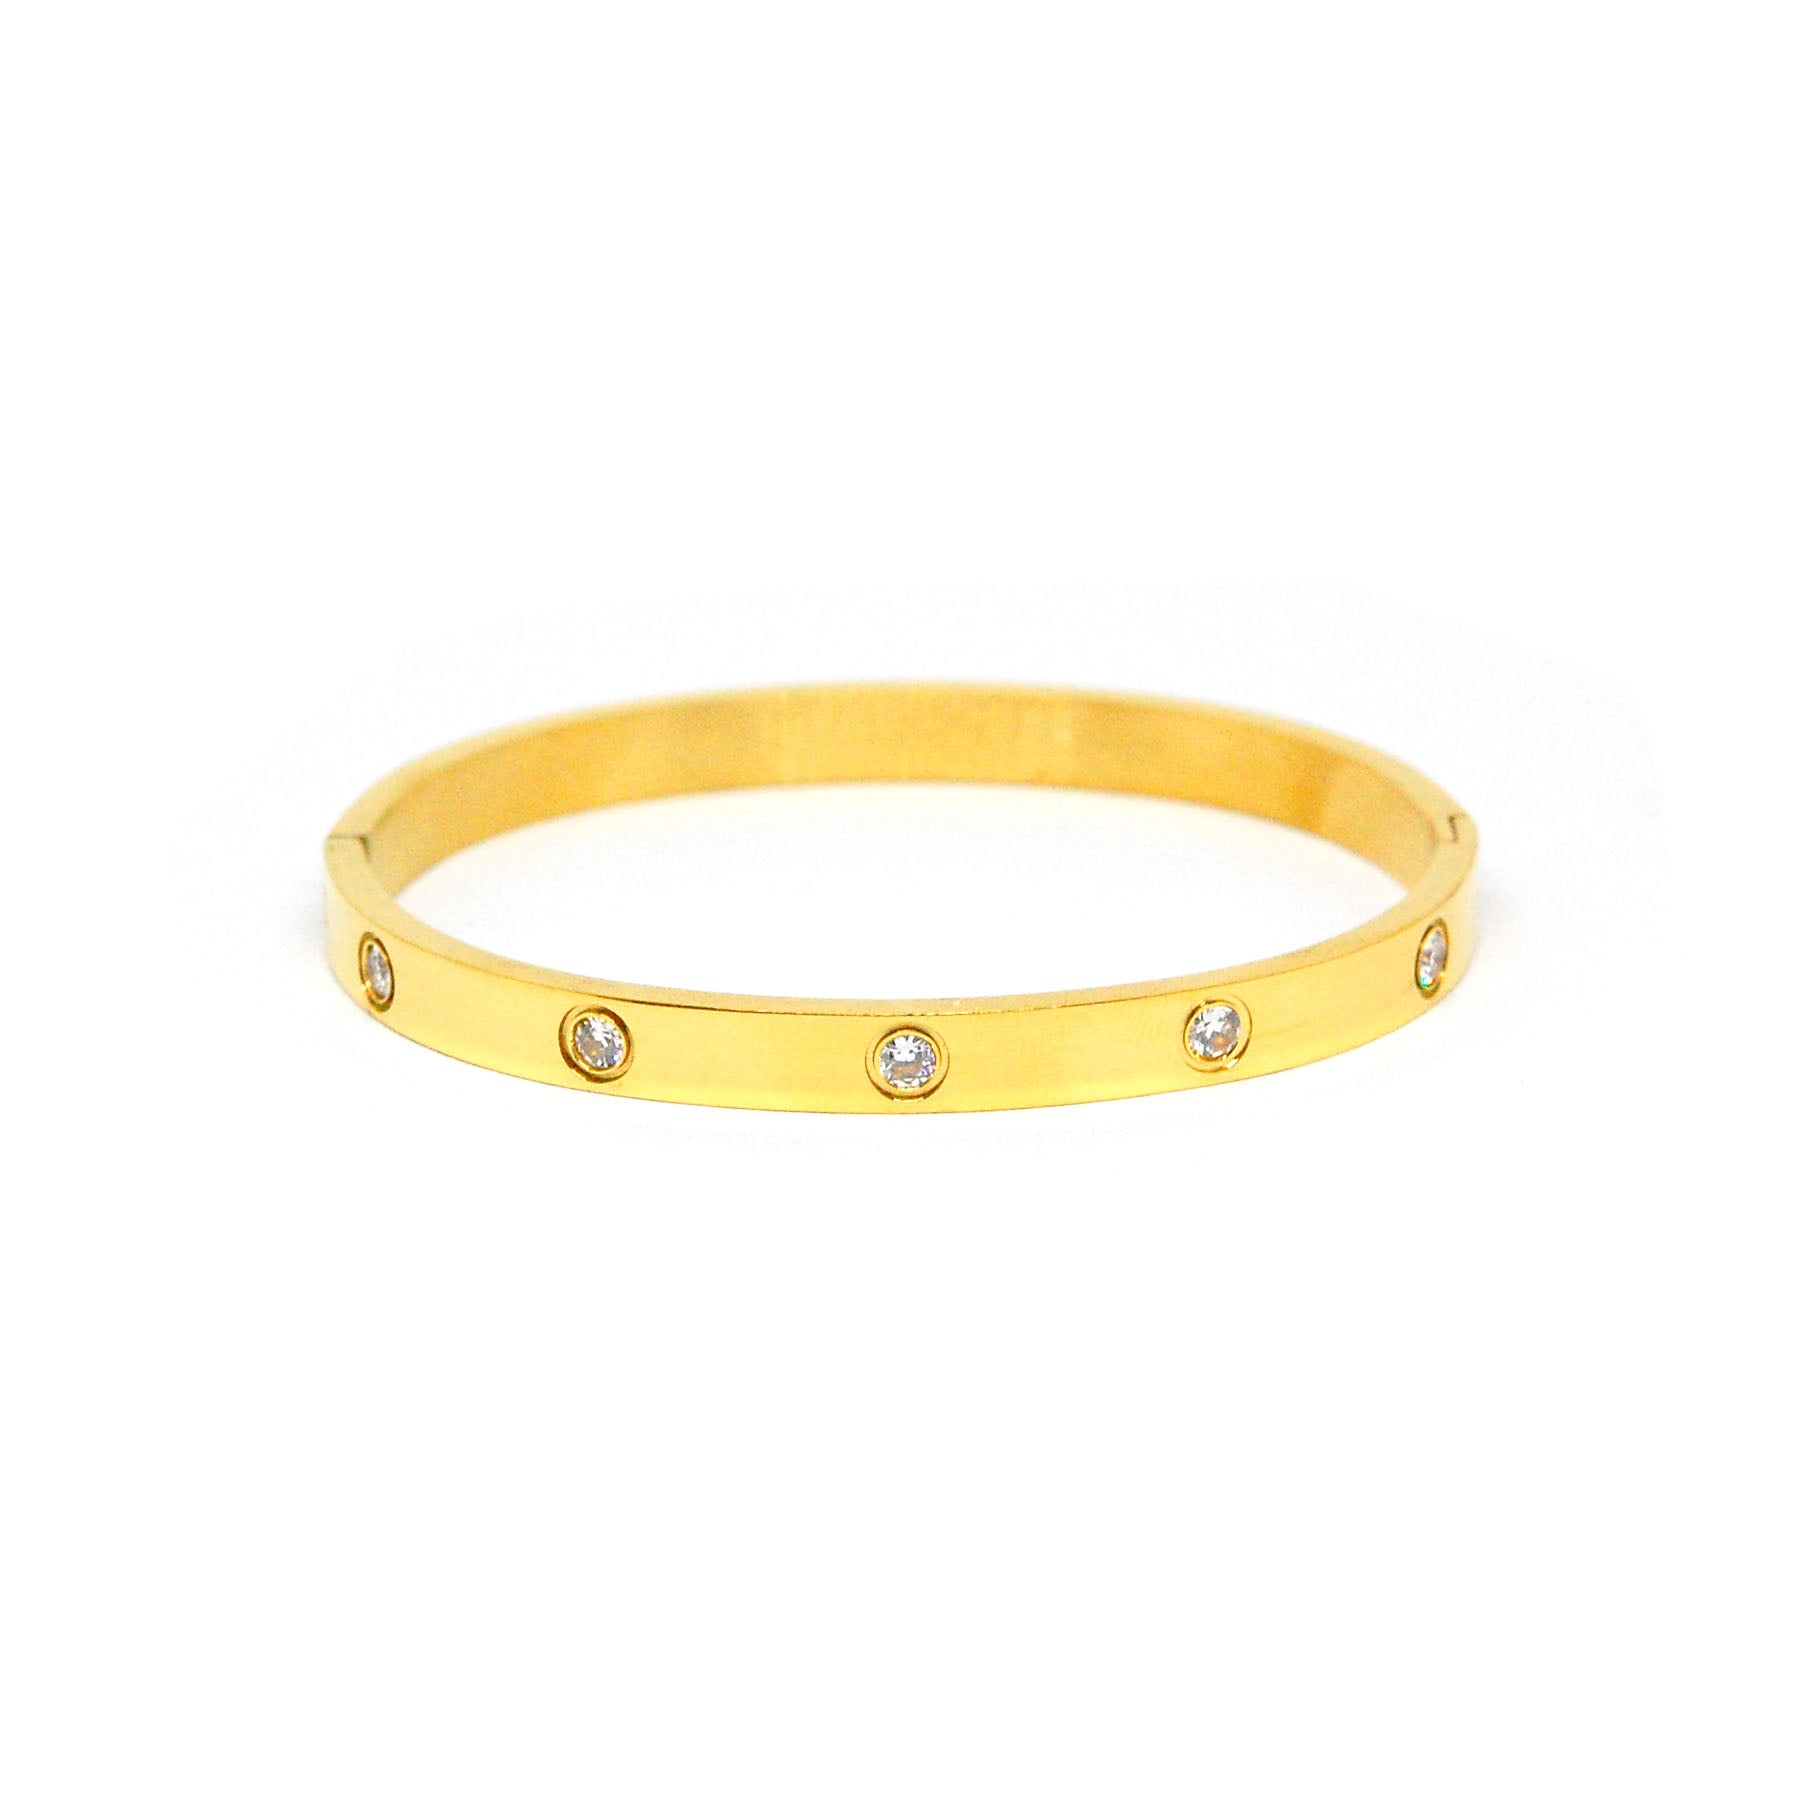 ESBG 7693: Gold-Plated 6.1mm 10-drill Bangle (Openable w/o SD)